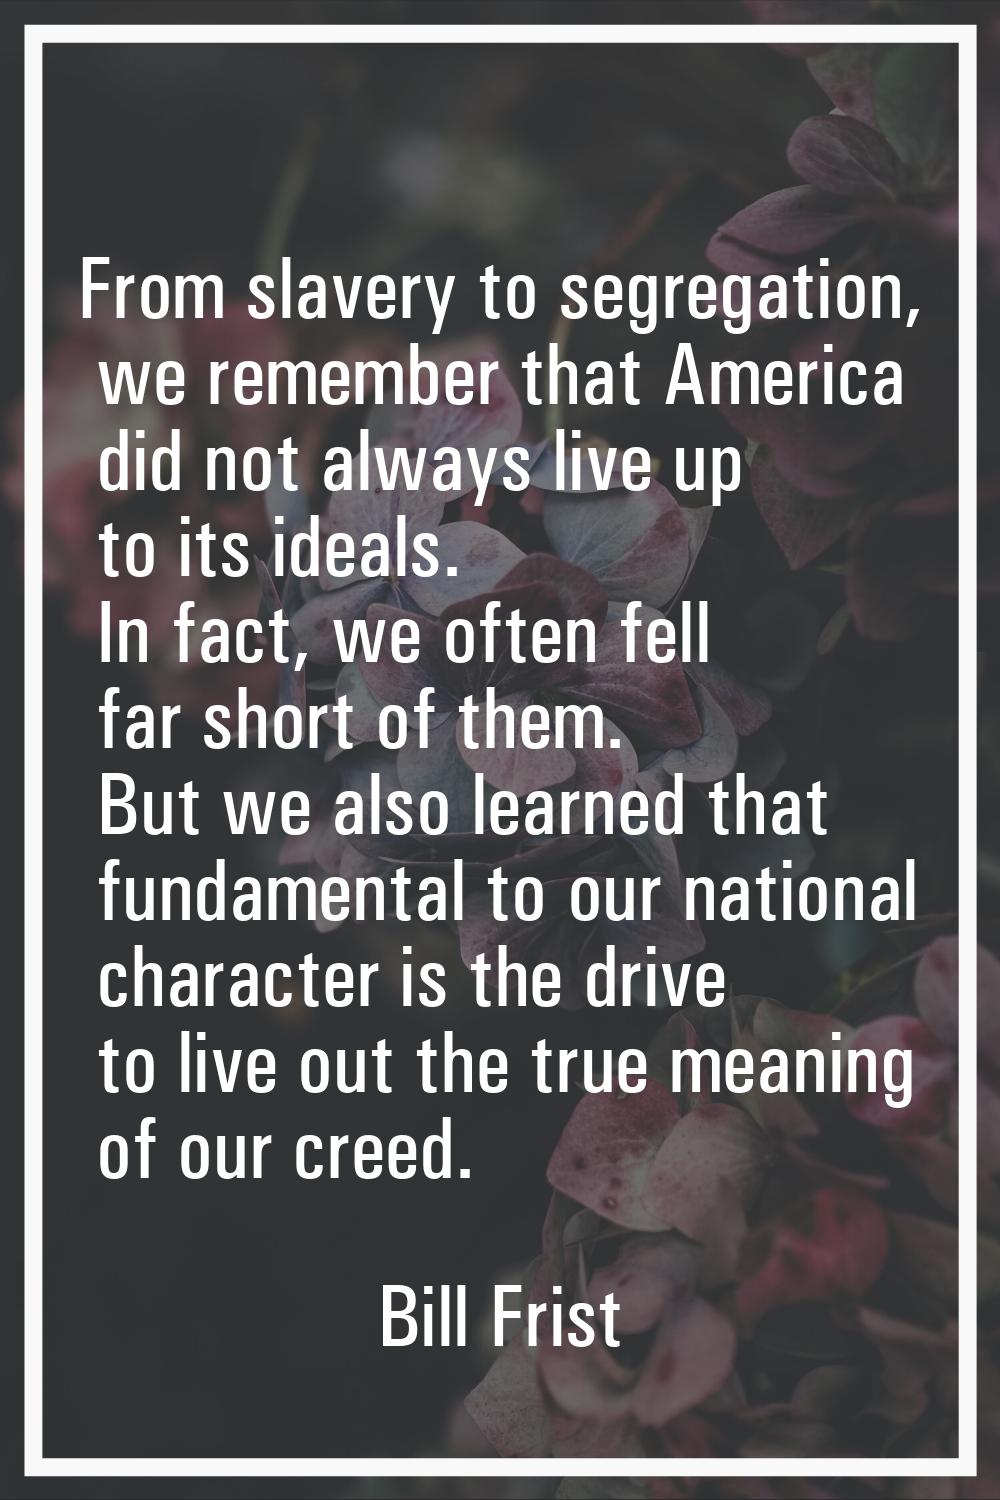 From slavery to segregation, we remember that America did not always live up to its ideals. In fact